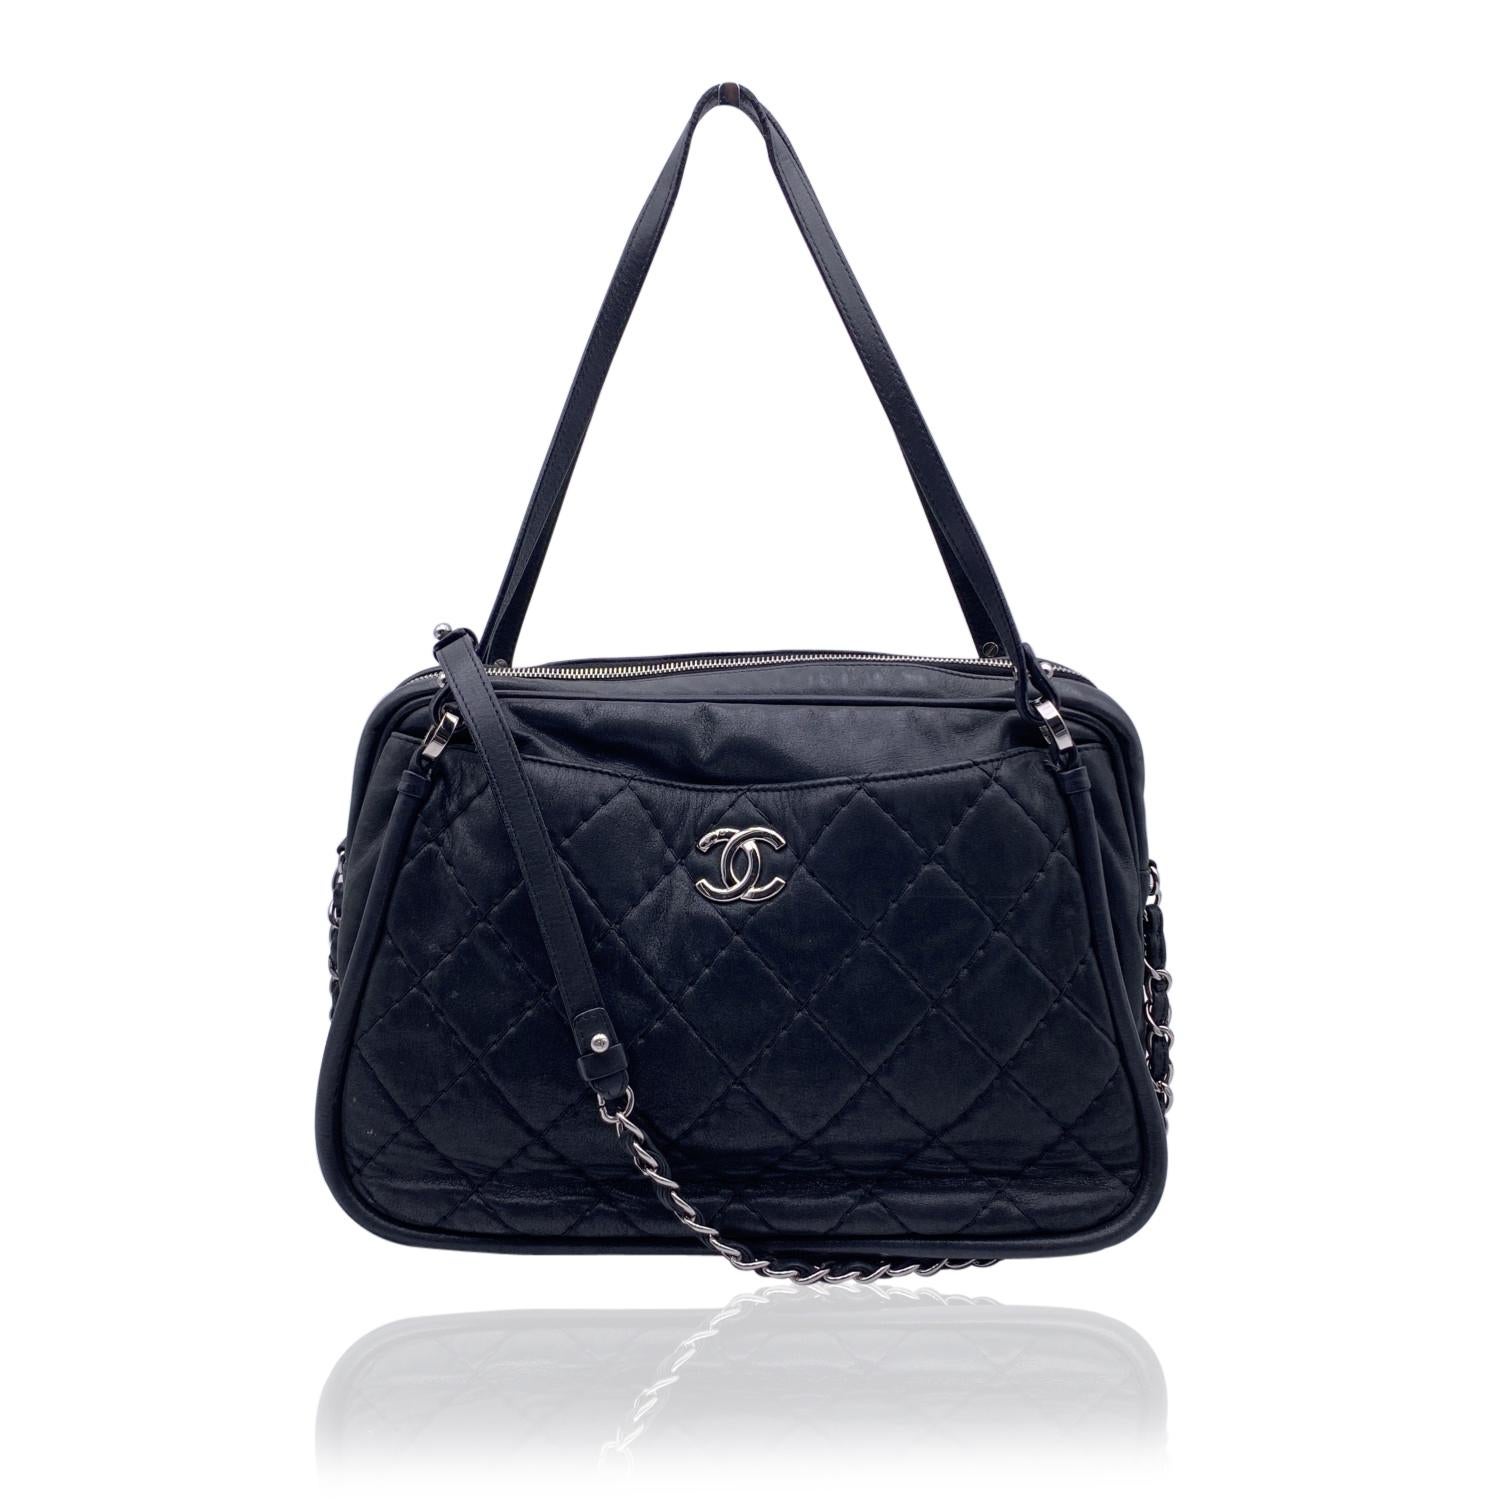 Chanel Black Quilted Leather Relax CC Tote Camera Shoulder Bag For Sale 6